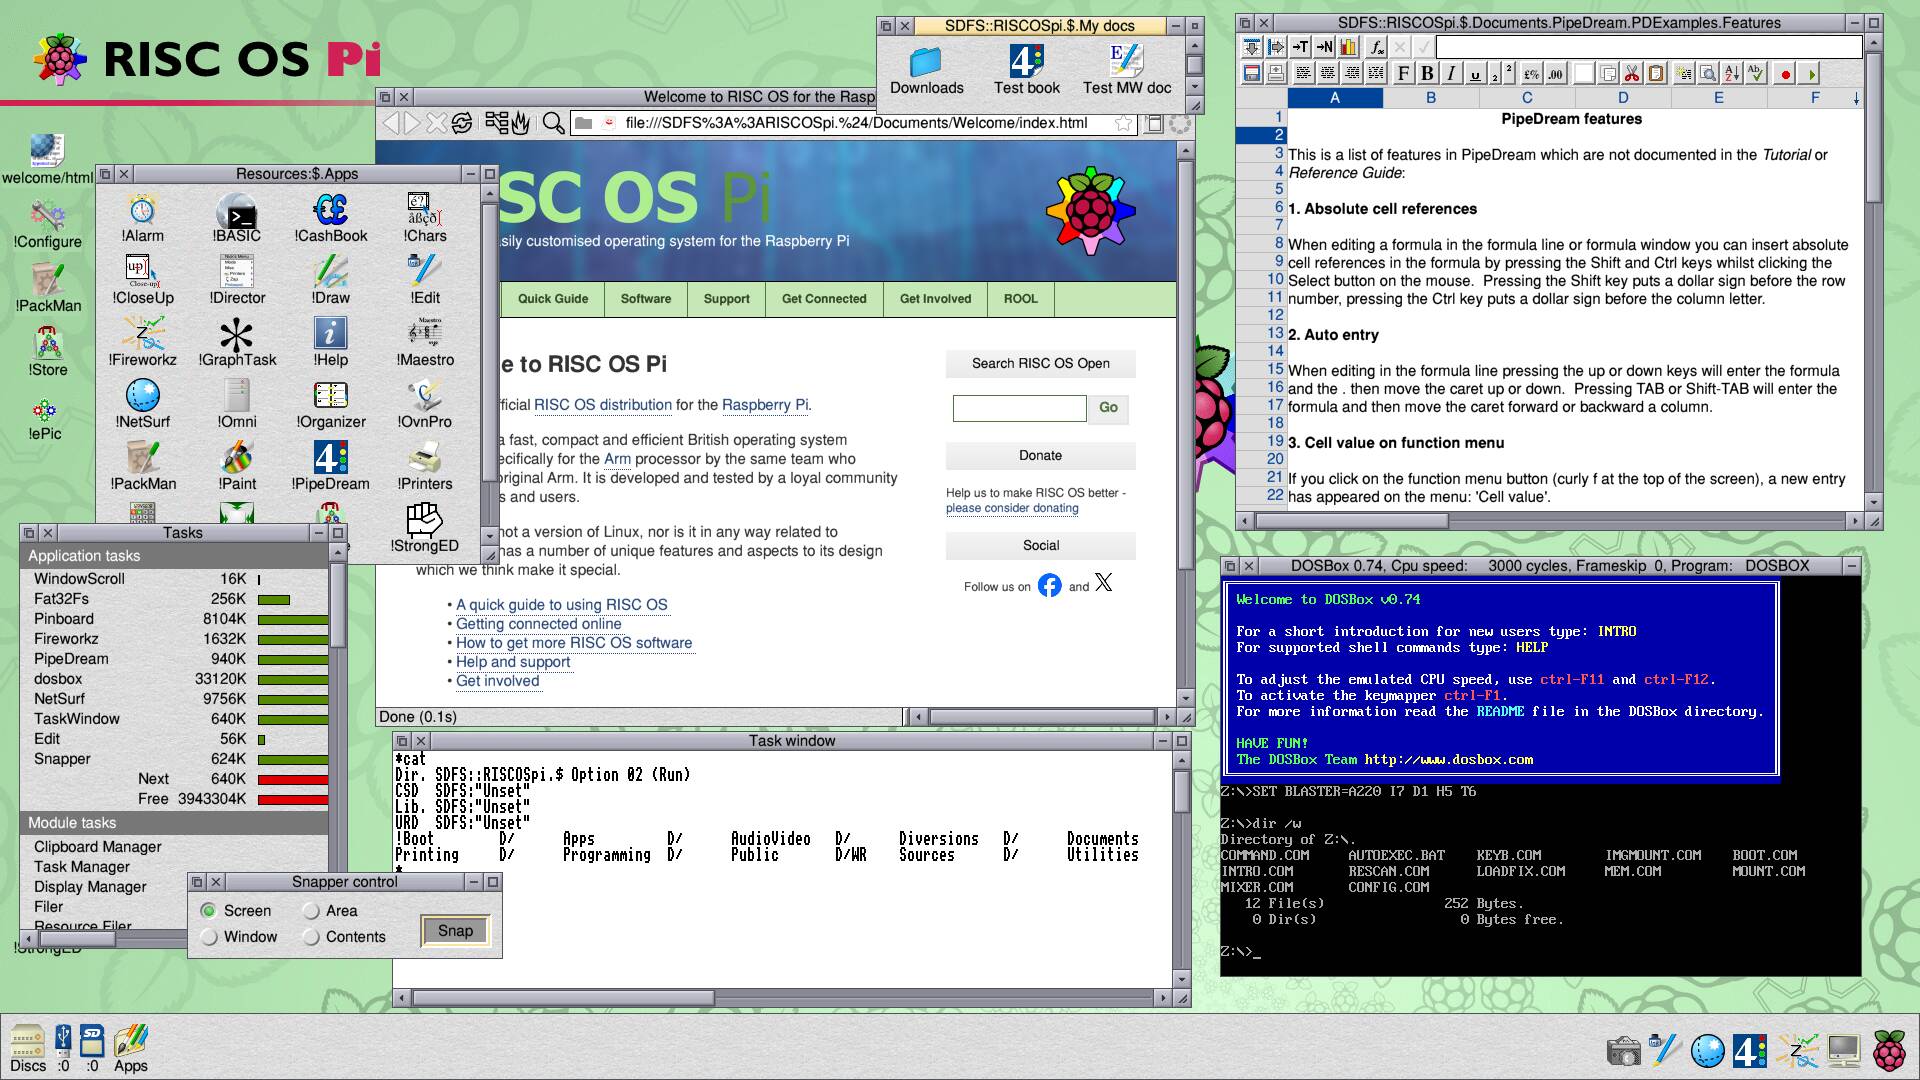 The new version of RISC OS, the original native Arm OS, runs on eight or nine Arm-based platforms, including the Raspberry Pi Zero, 1, 2, 3 and 4 – 